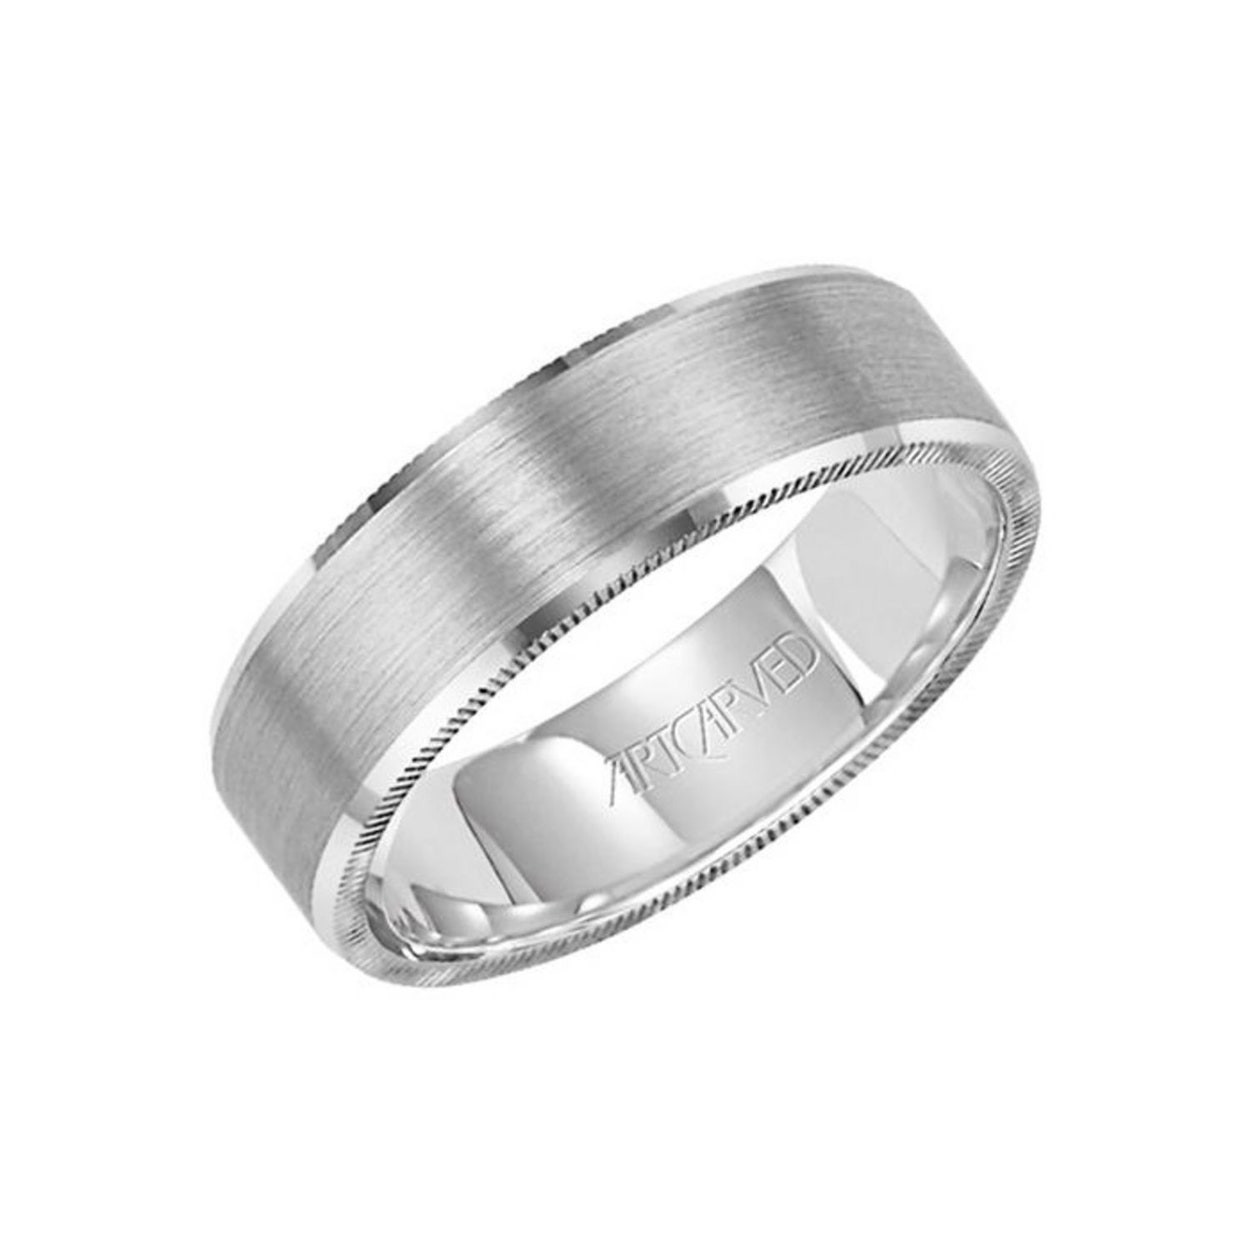 Groom Wedding Bands
 15 Men s Wedding Bands Your Groom Won t Want to Take f